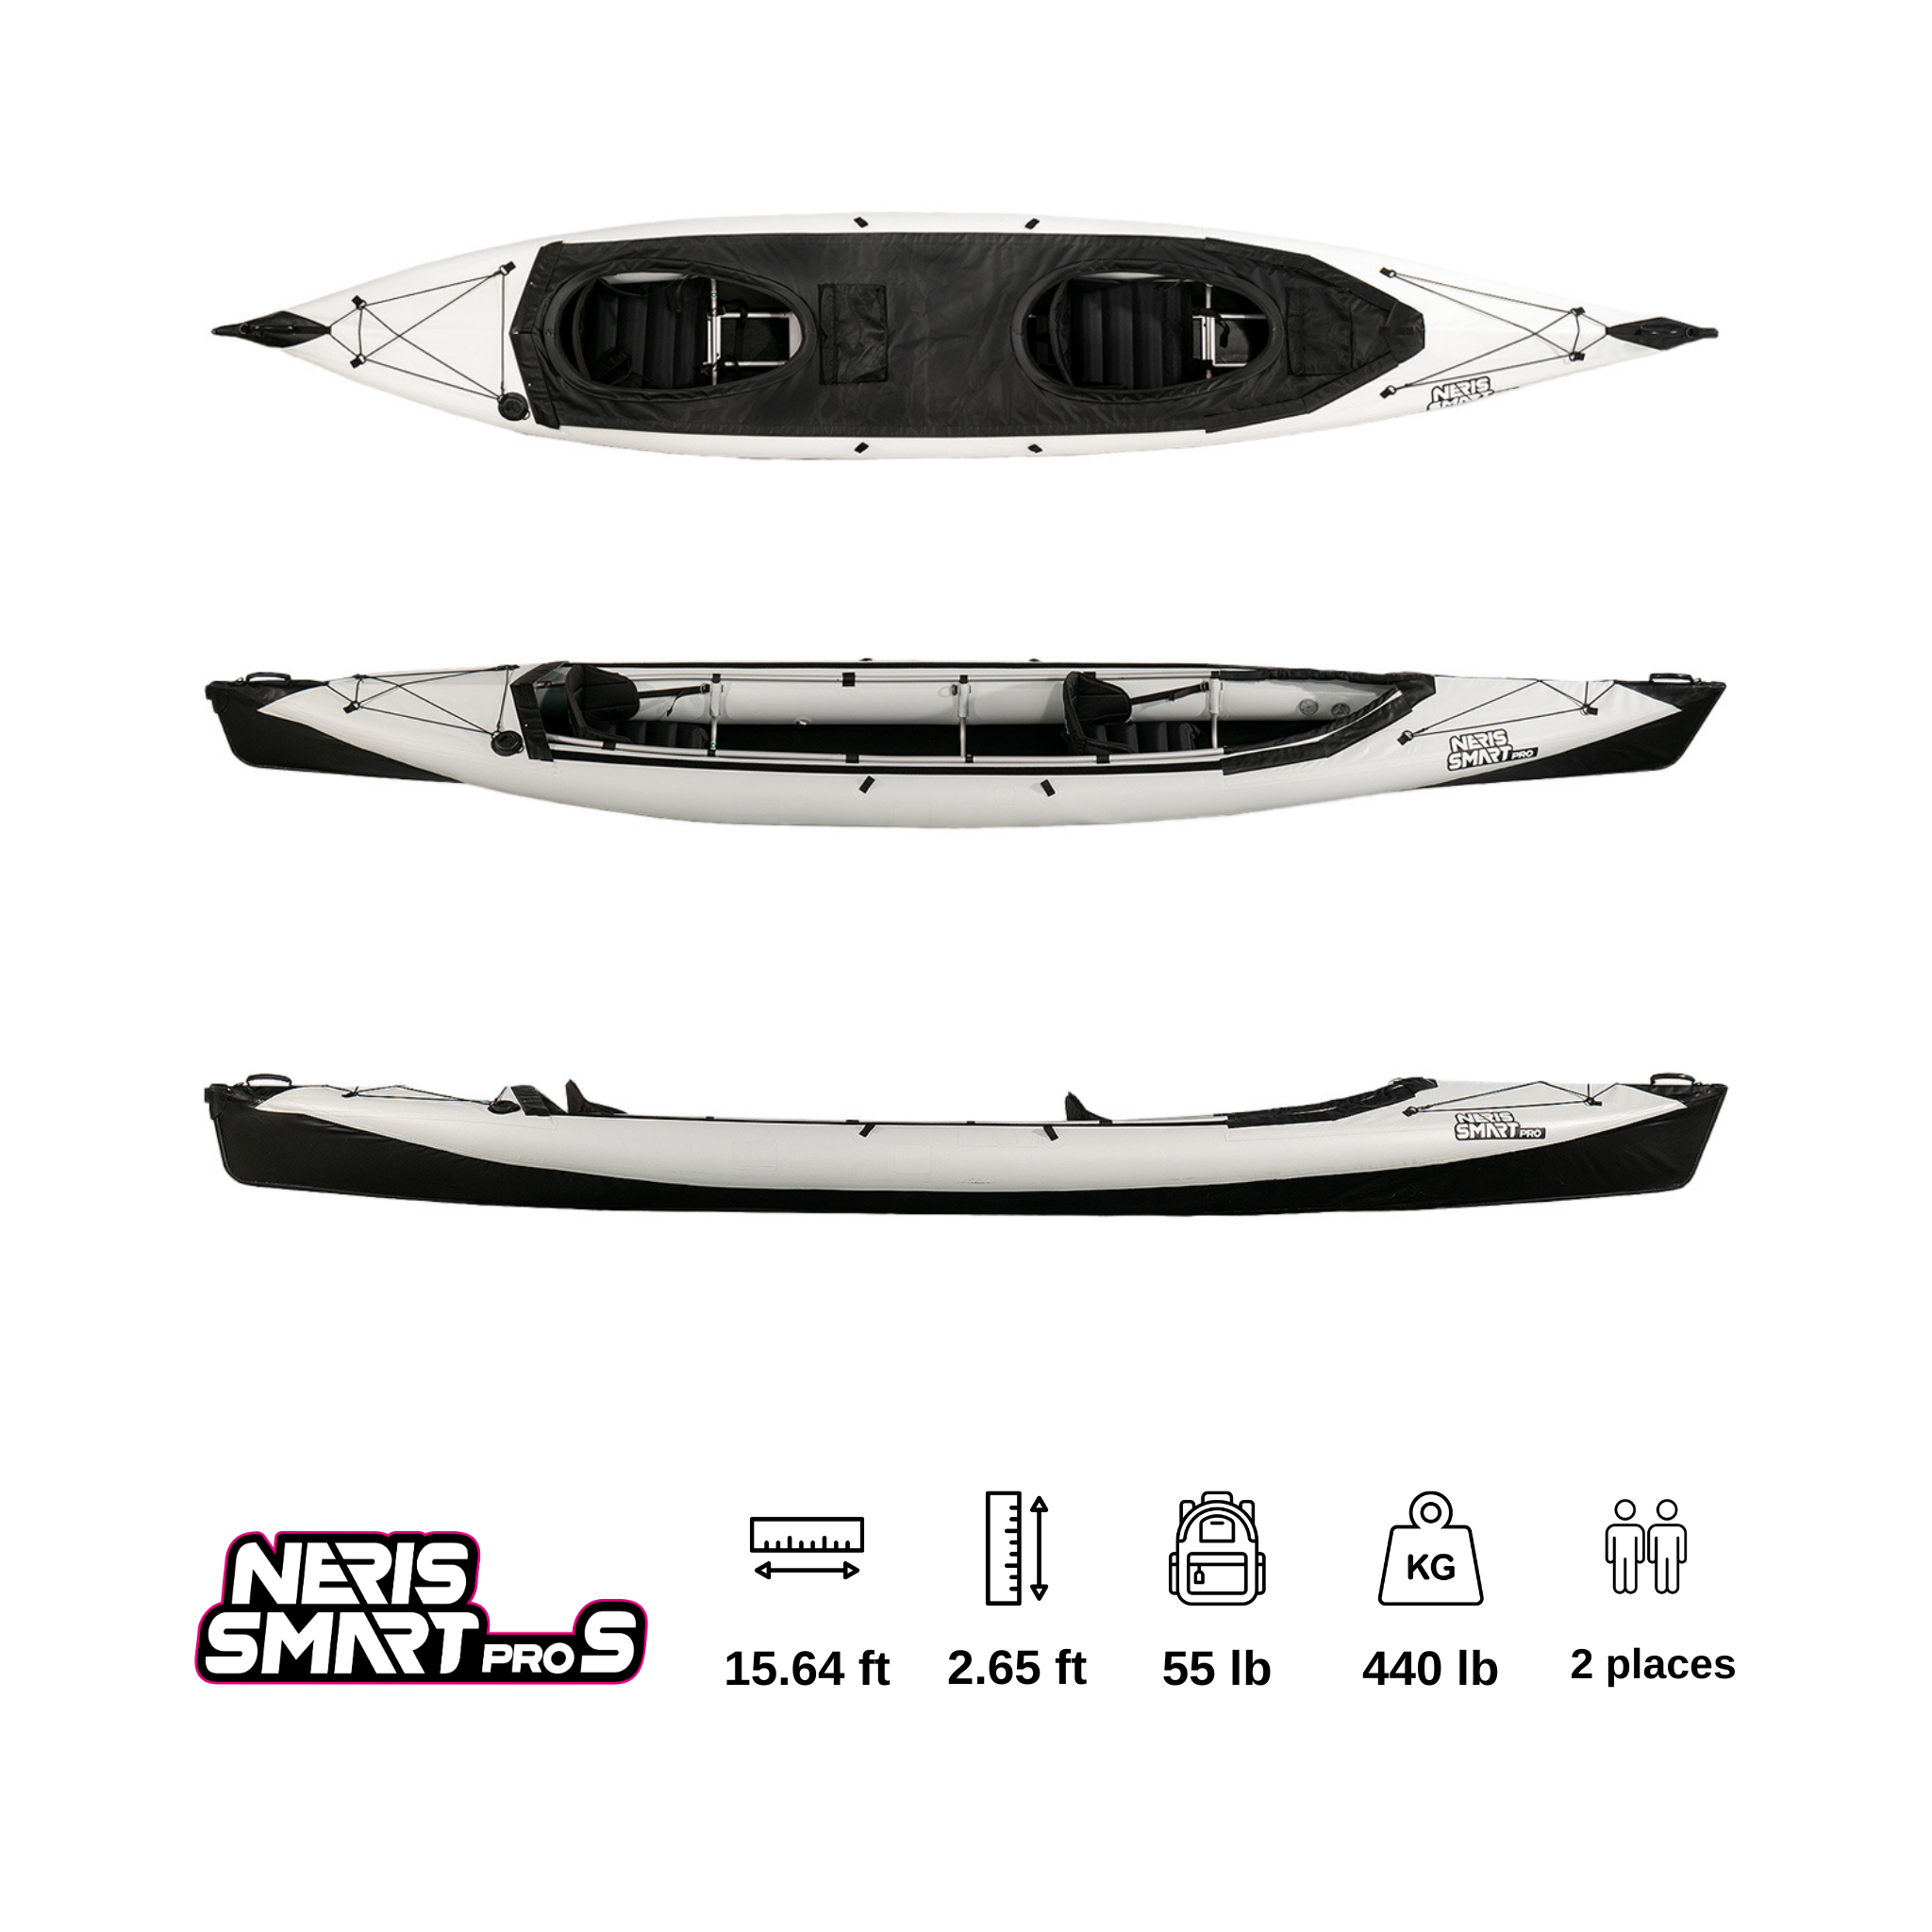 Neris Tandem Pro is a two-seated foldable kayak. This one is available in white and black. The upper part is white, while the bottom one is black.